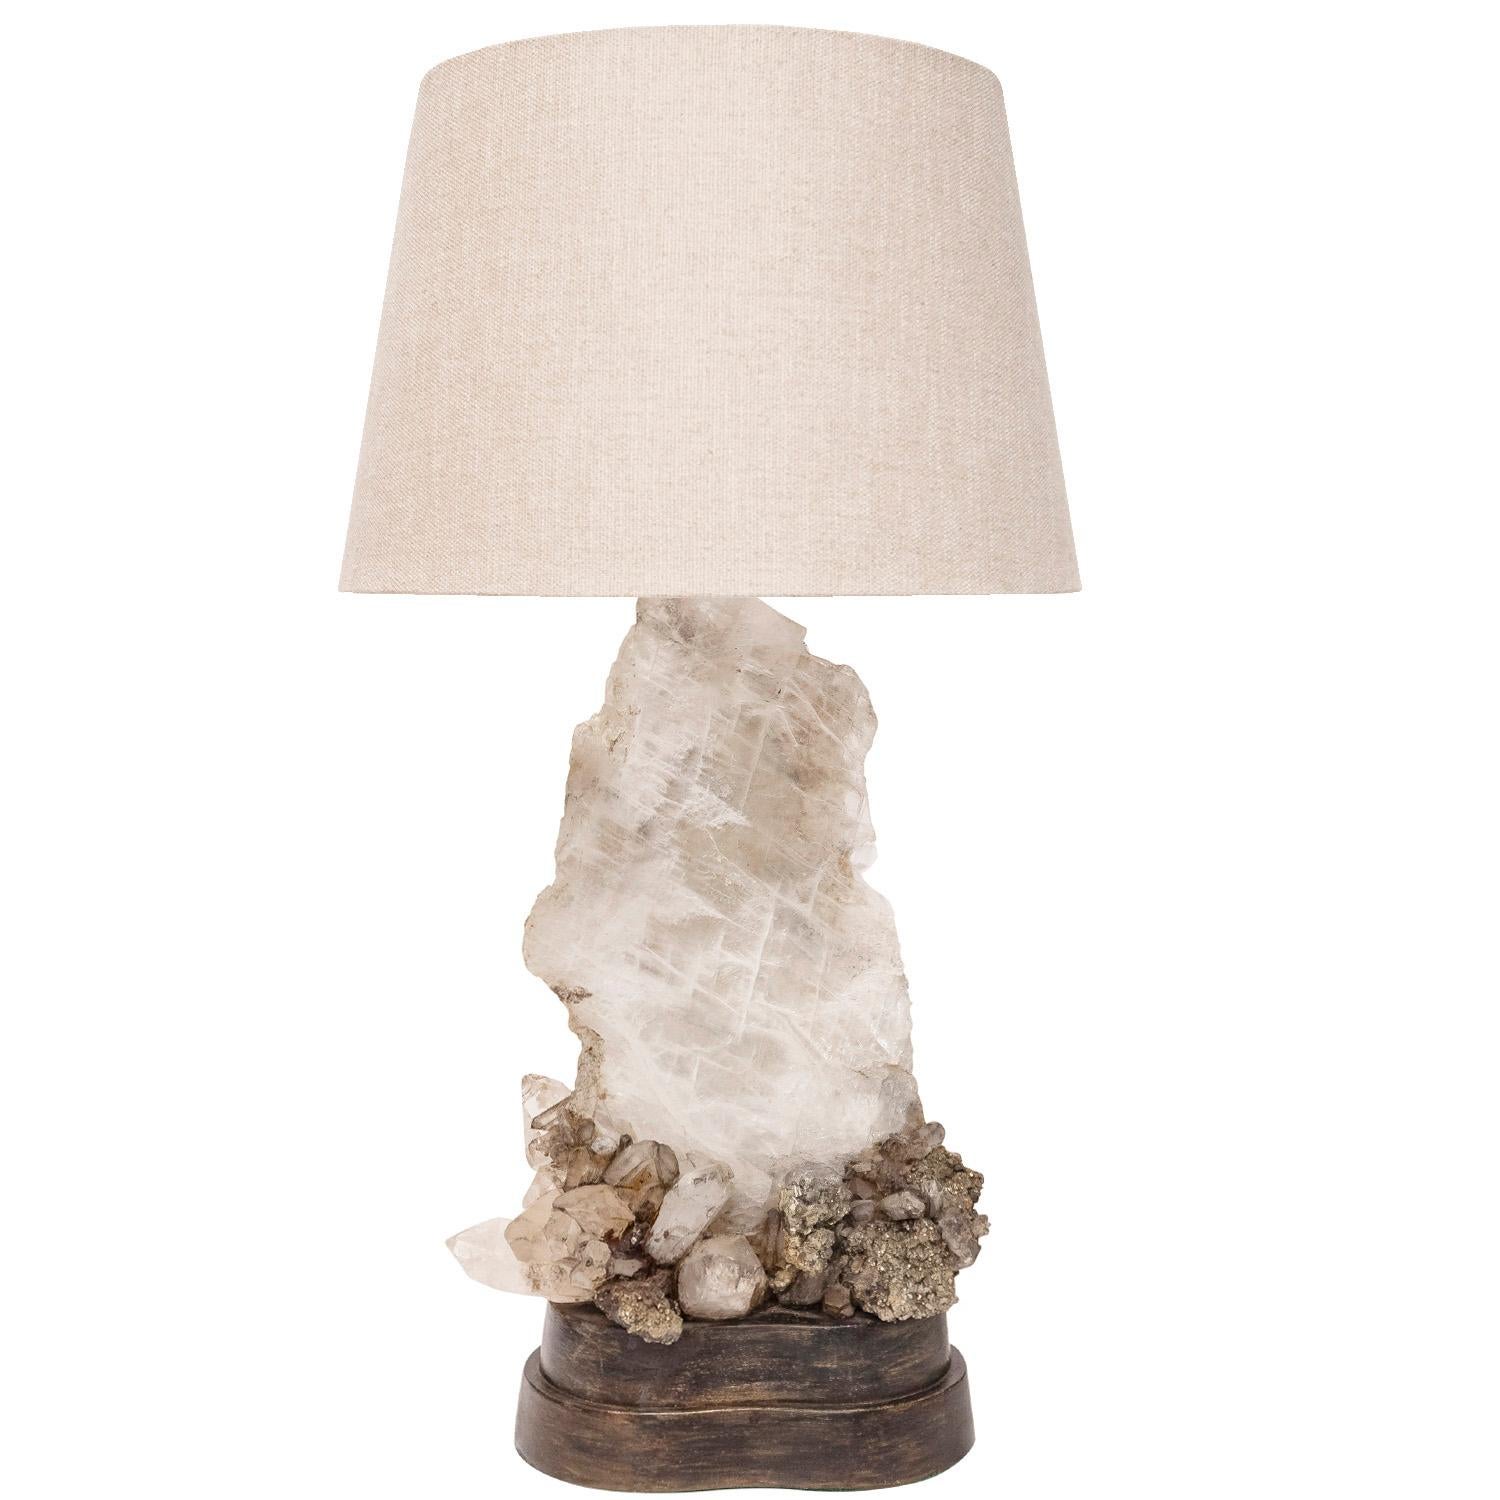 Large and exceptional studio made table lamp with a quartz slab and pyrite clusters with back illumination by Carole Stupell, American 1950's.  Everything about this lamp is exceptional:  the use of a quartz slab, the use of pyrite and the back